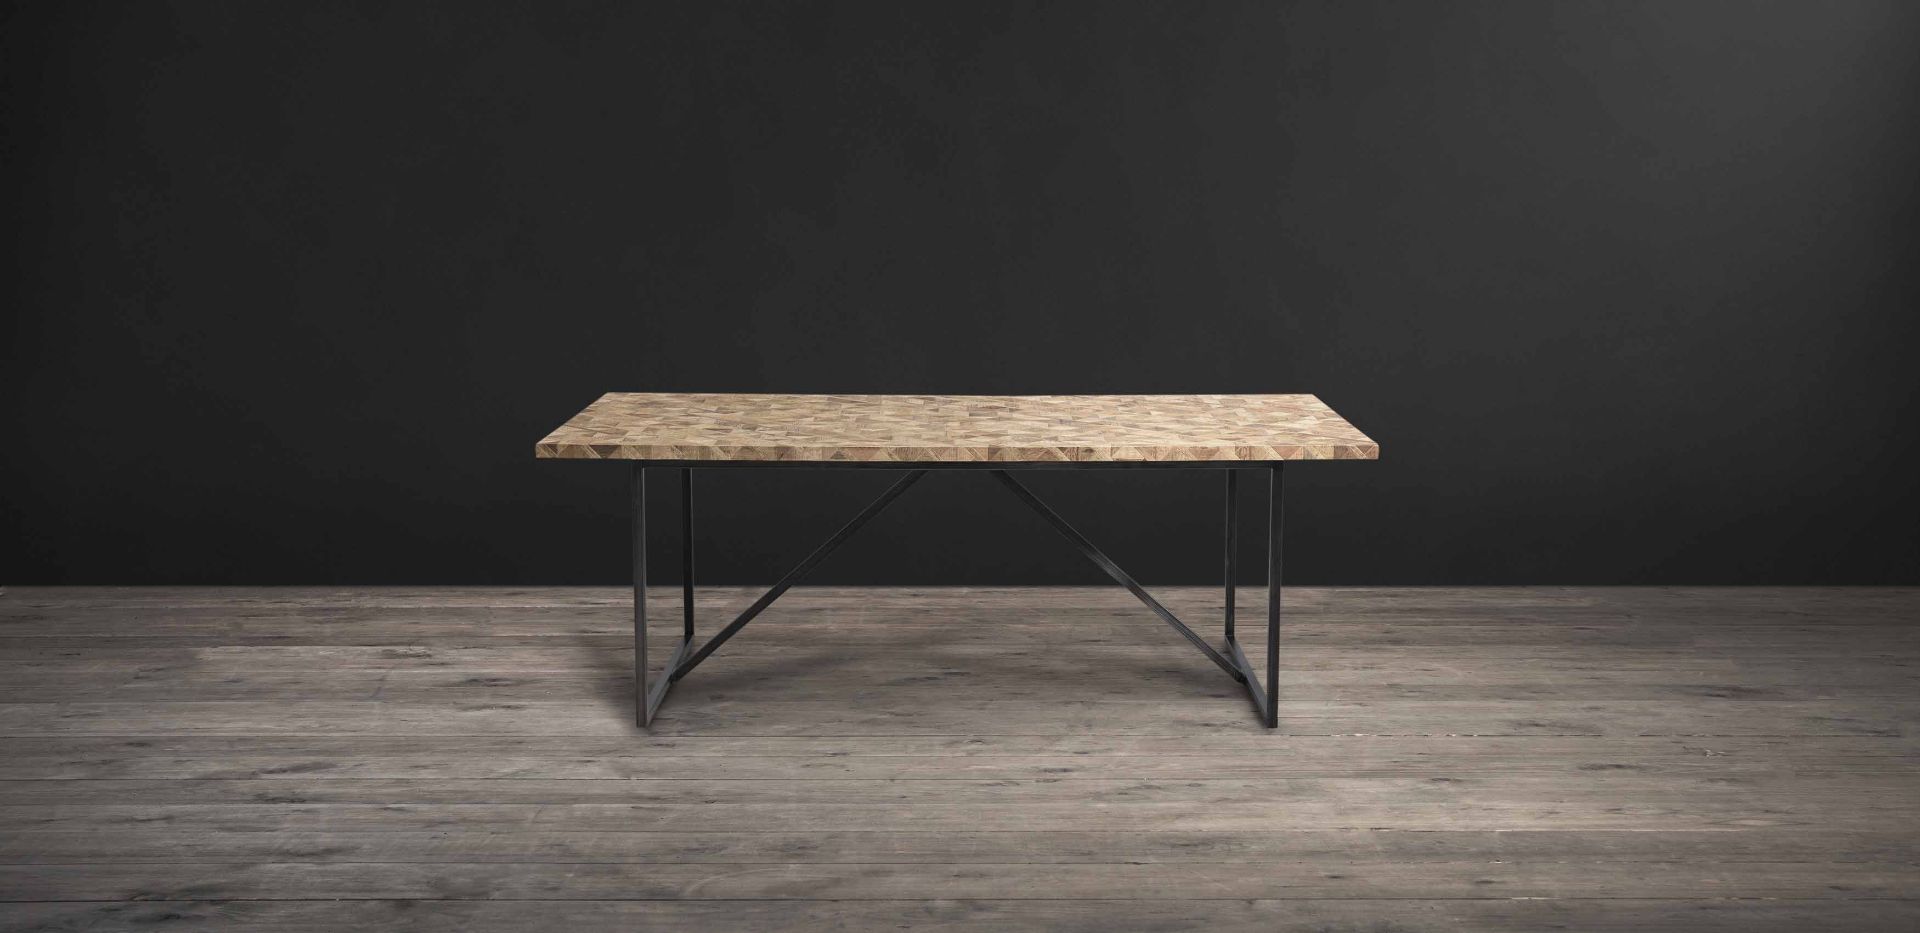 Vestige Classic Dining Table “A modern take on old timber” A classic vintage material is given a - Image 2 of 2